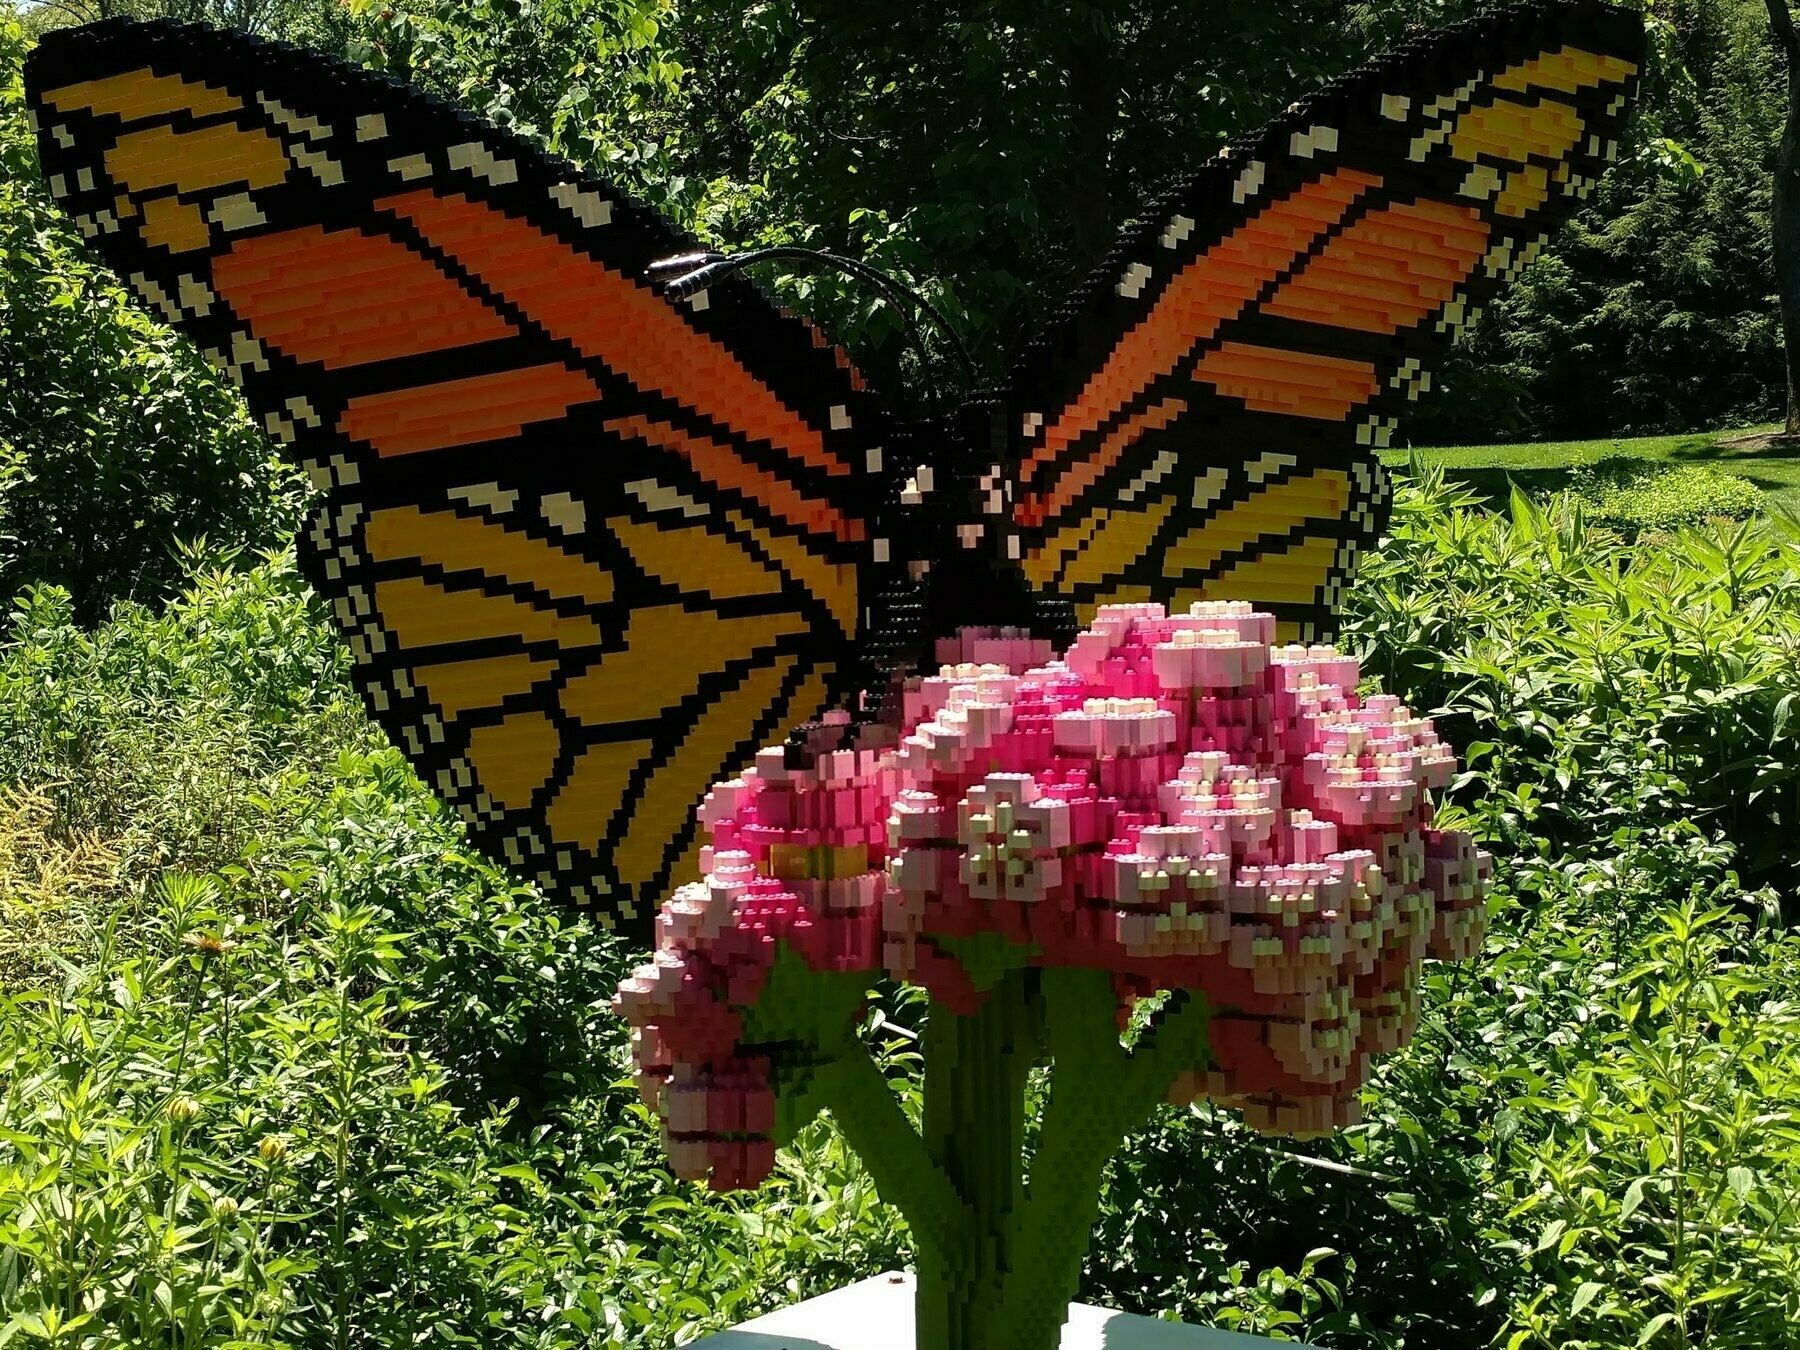 6 foot tall sculpture of monarch butterfly on a flower